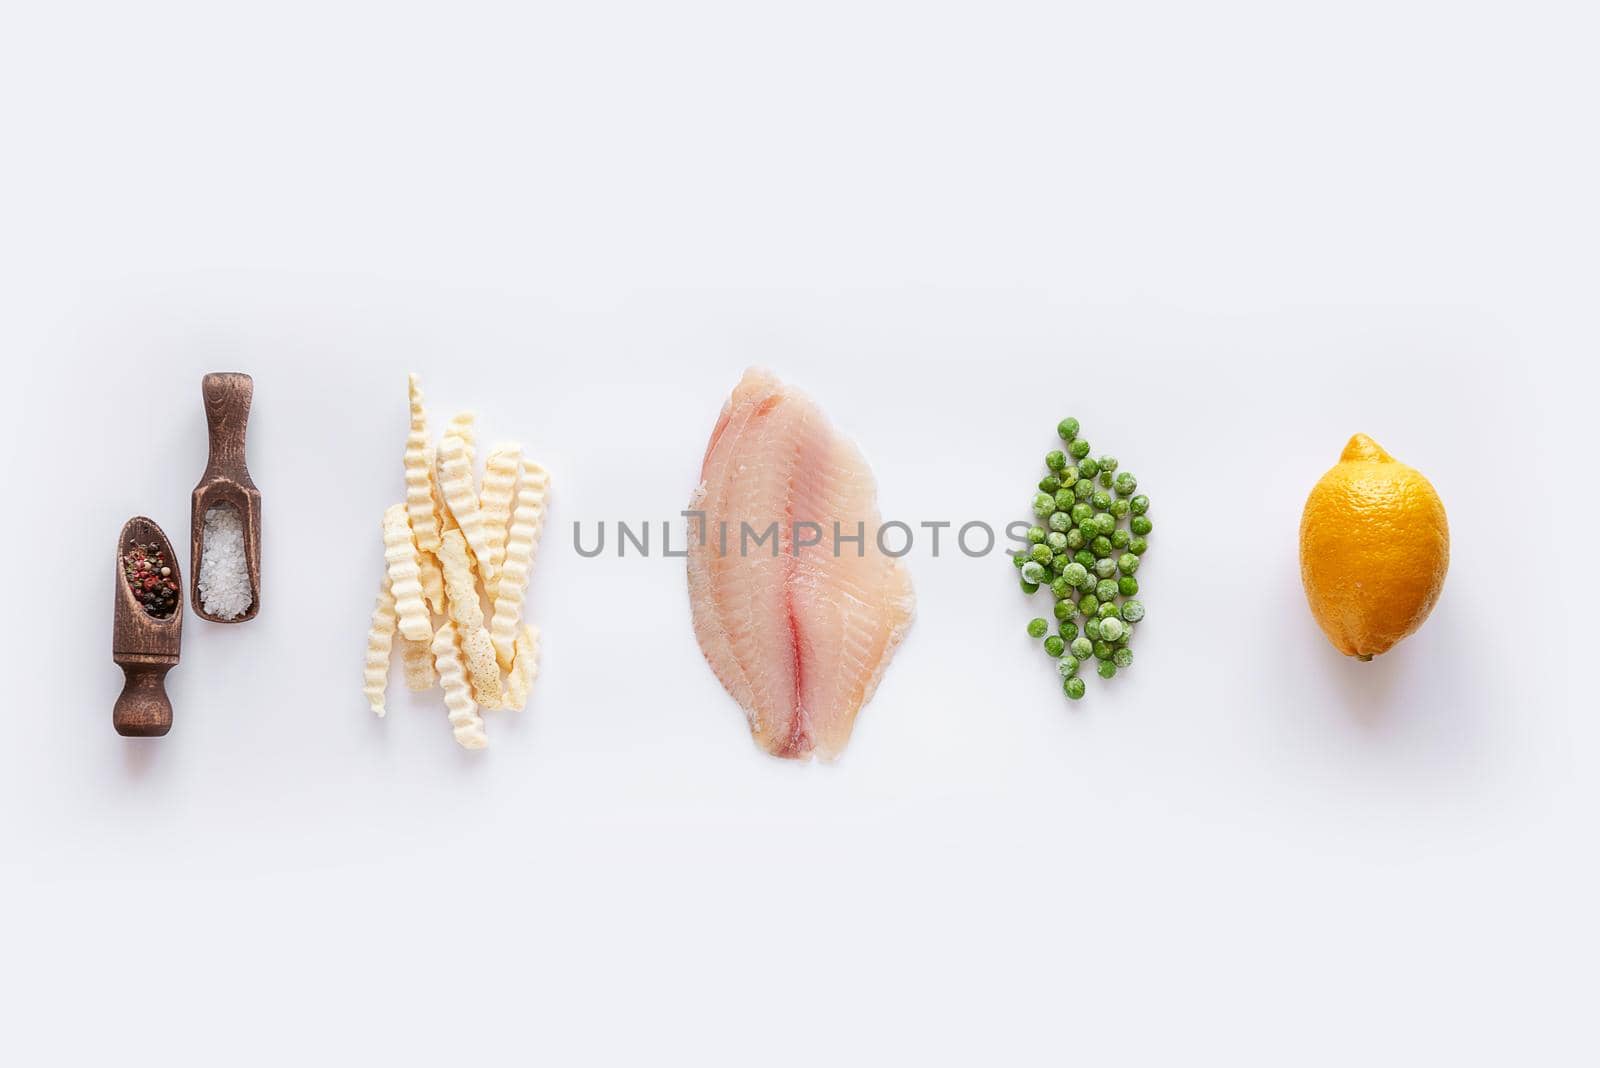 set of ingredients for the preparation of the classic English dish fish and chips